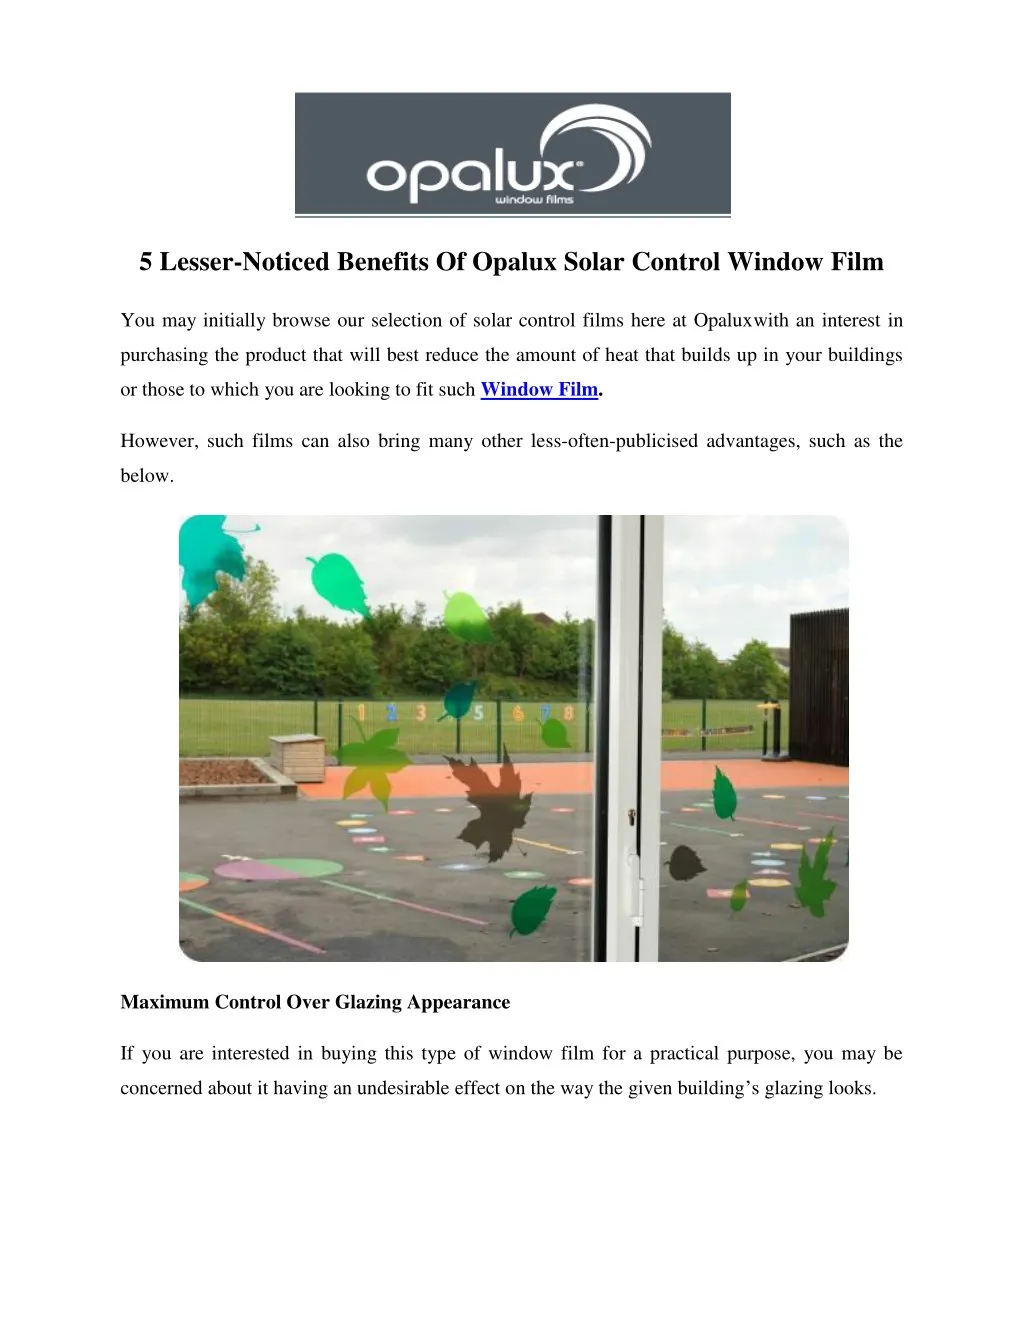 5 lesser noticed benefits of opalux solar control